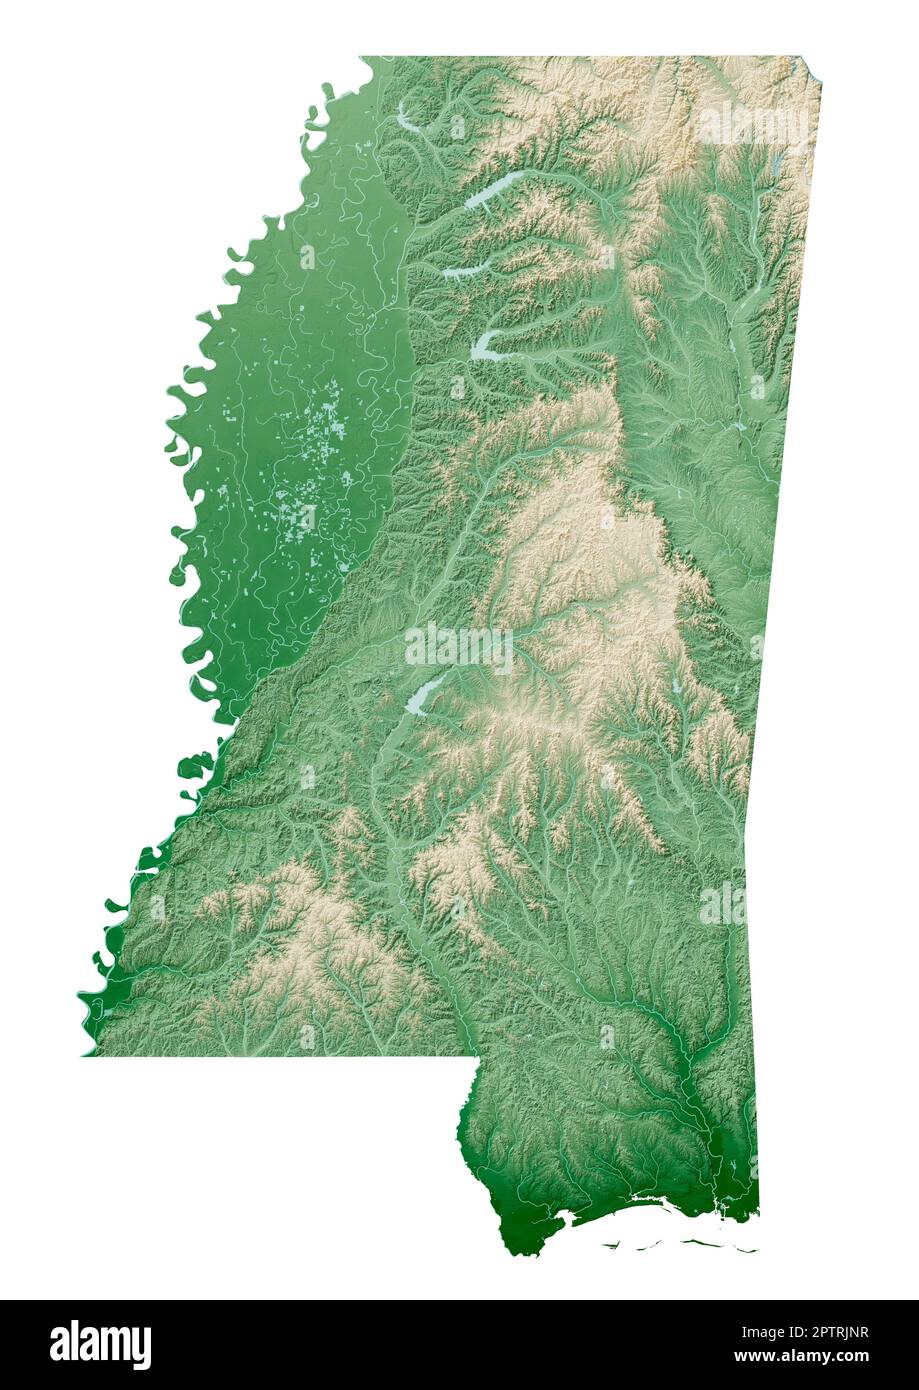 The US state of Mississippi. Highly detailed 3D rendering of a shaded relief map with water bodies. Colored by elevation. Created with satellite data. Stock Photo